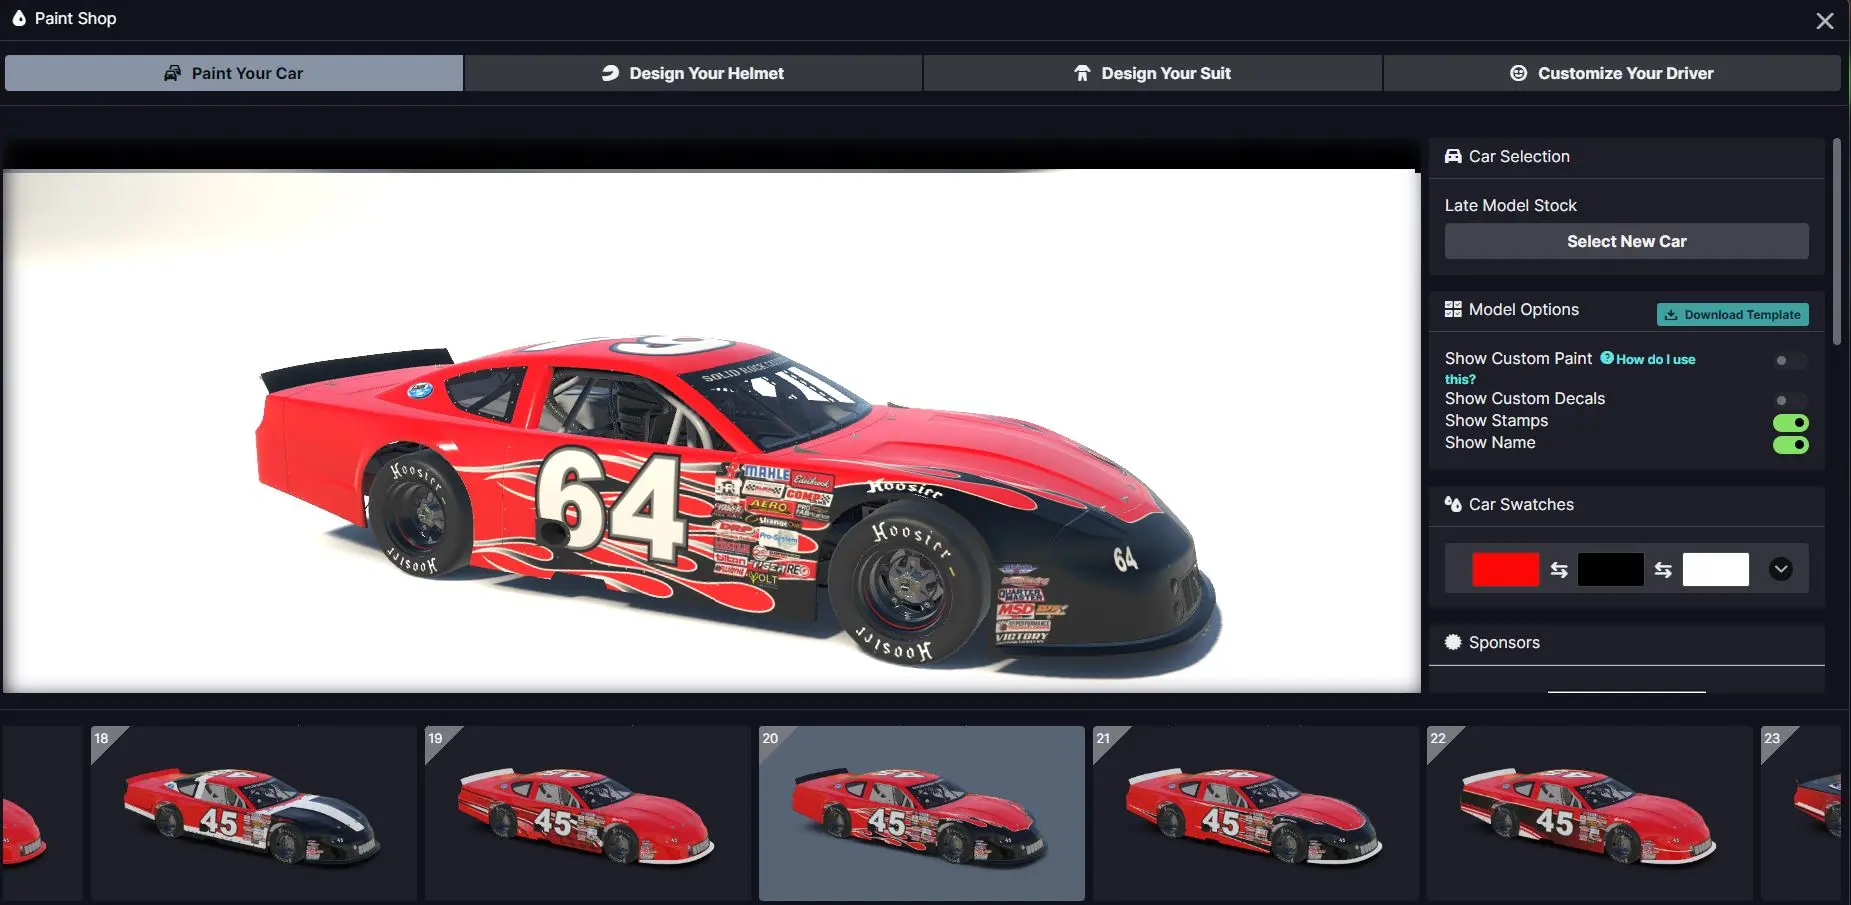 The default iRacing Paint Shop offers limited options.